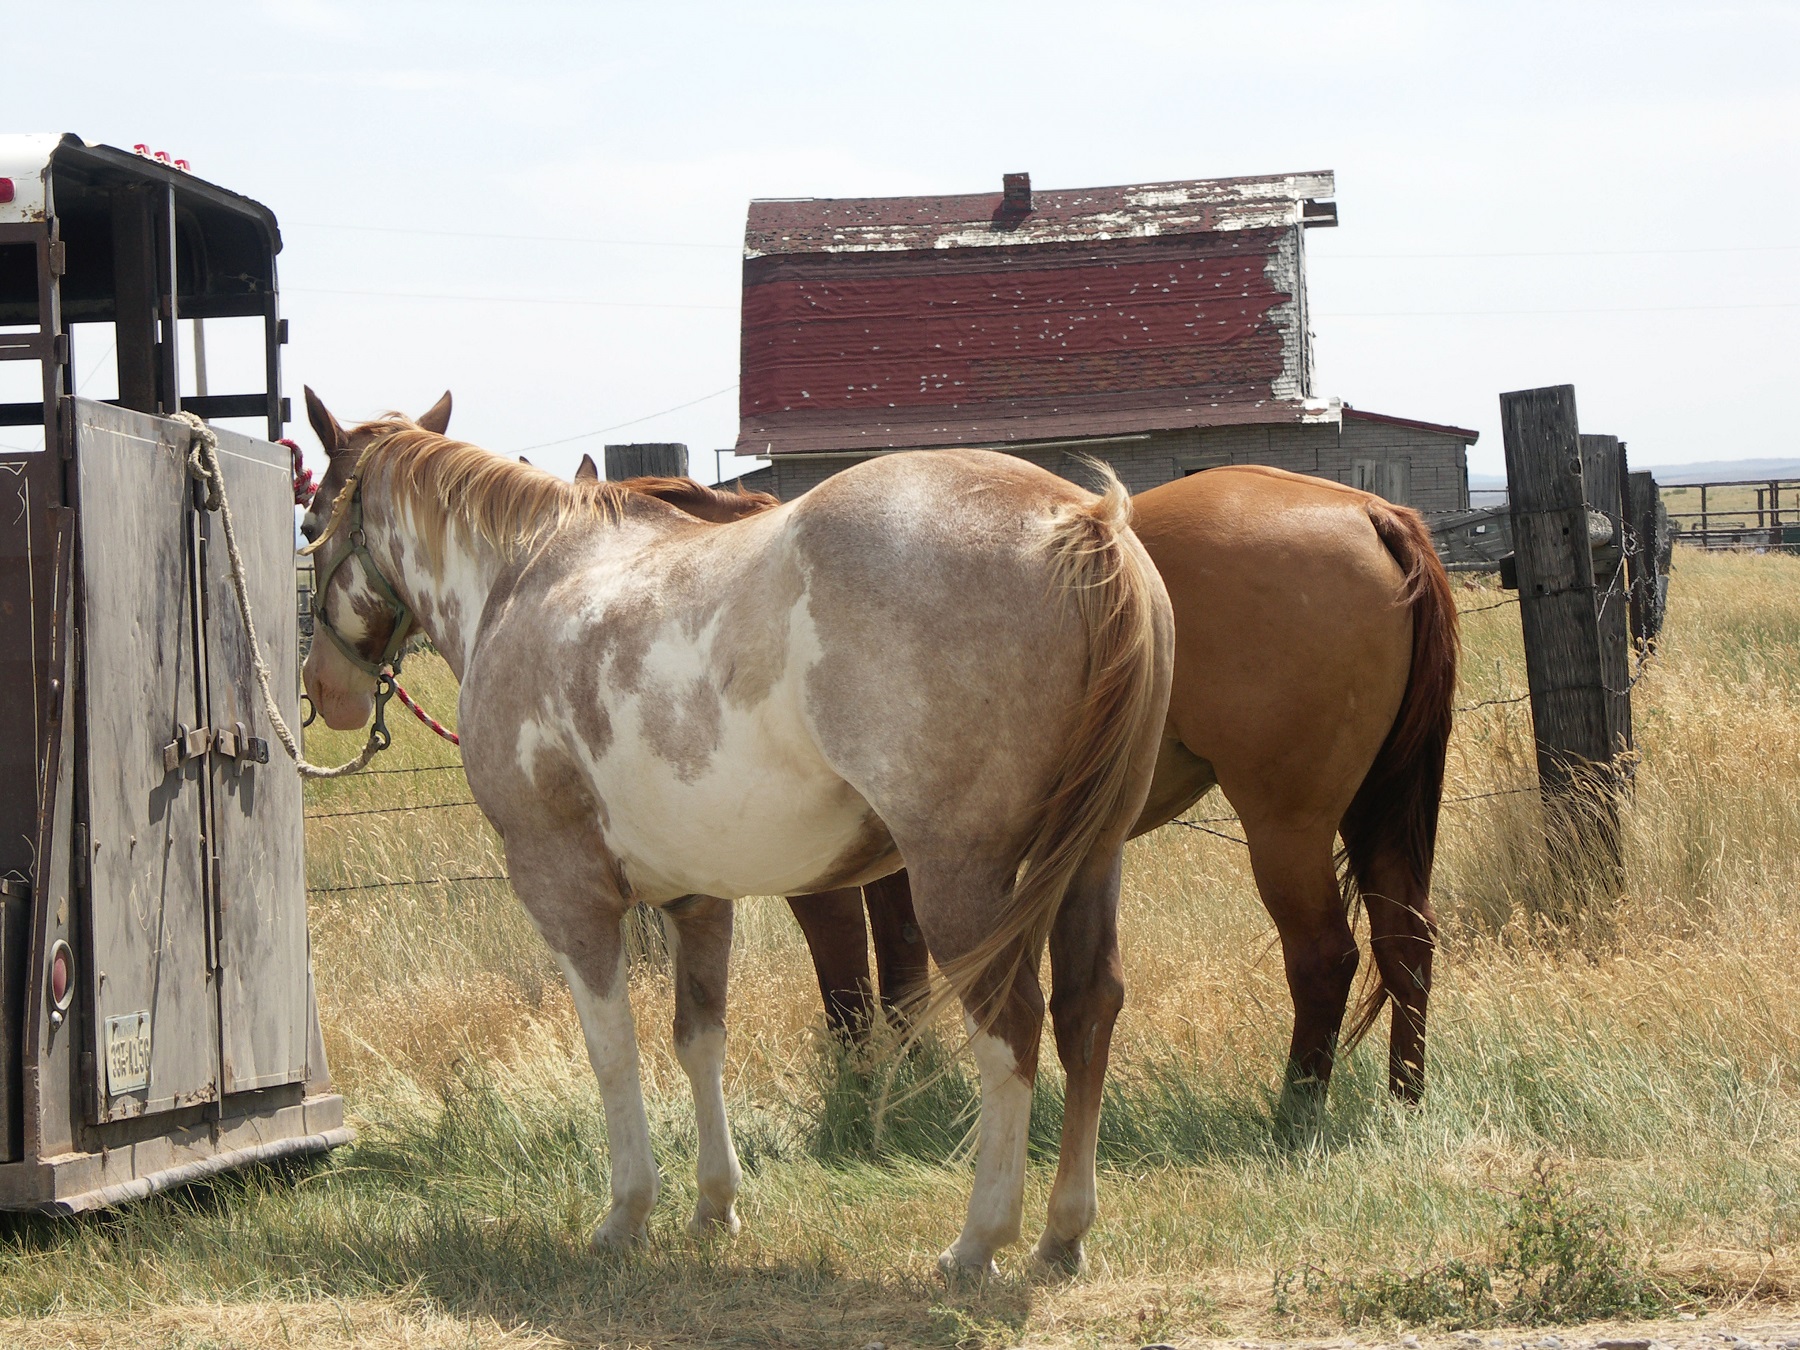 Your Cybersecurity Budget Is a Horse's Rear End